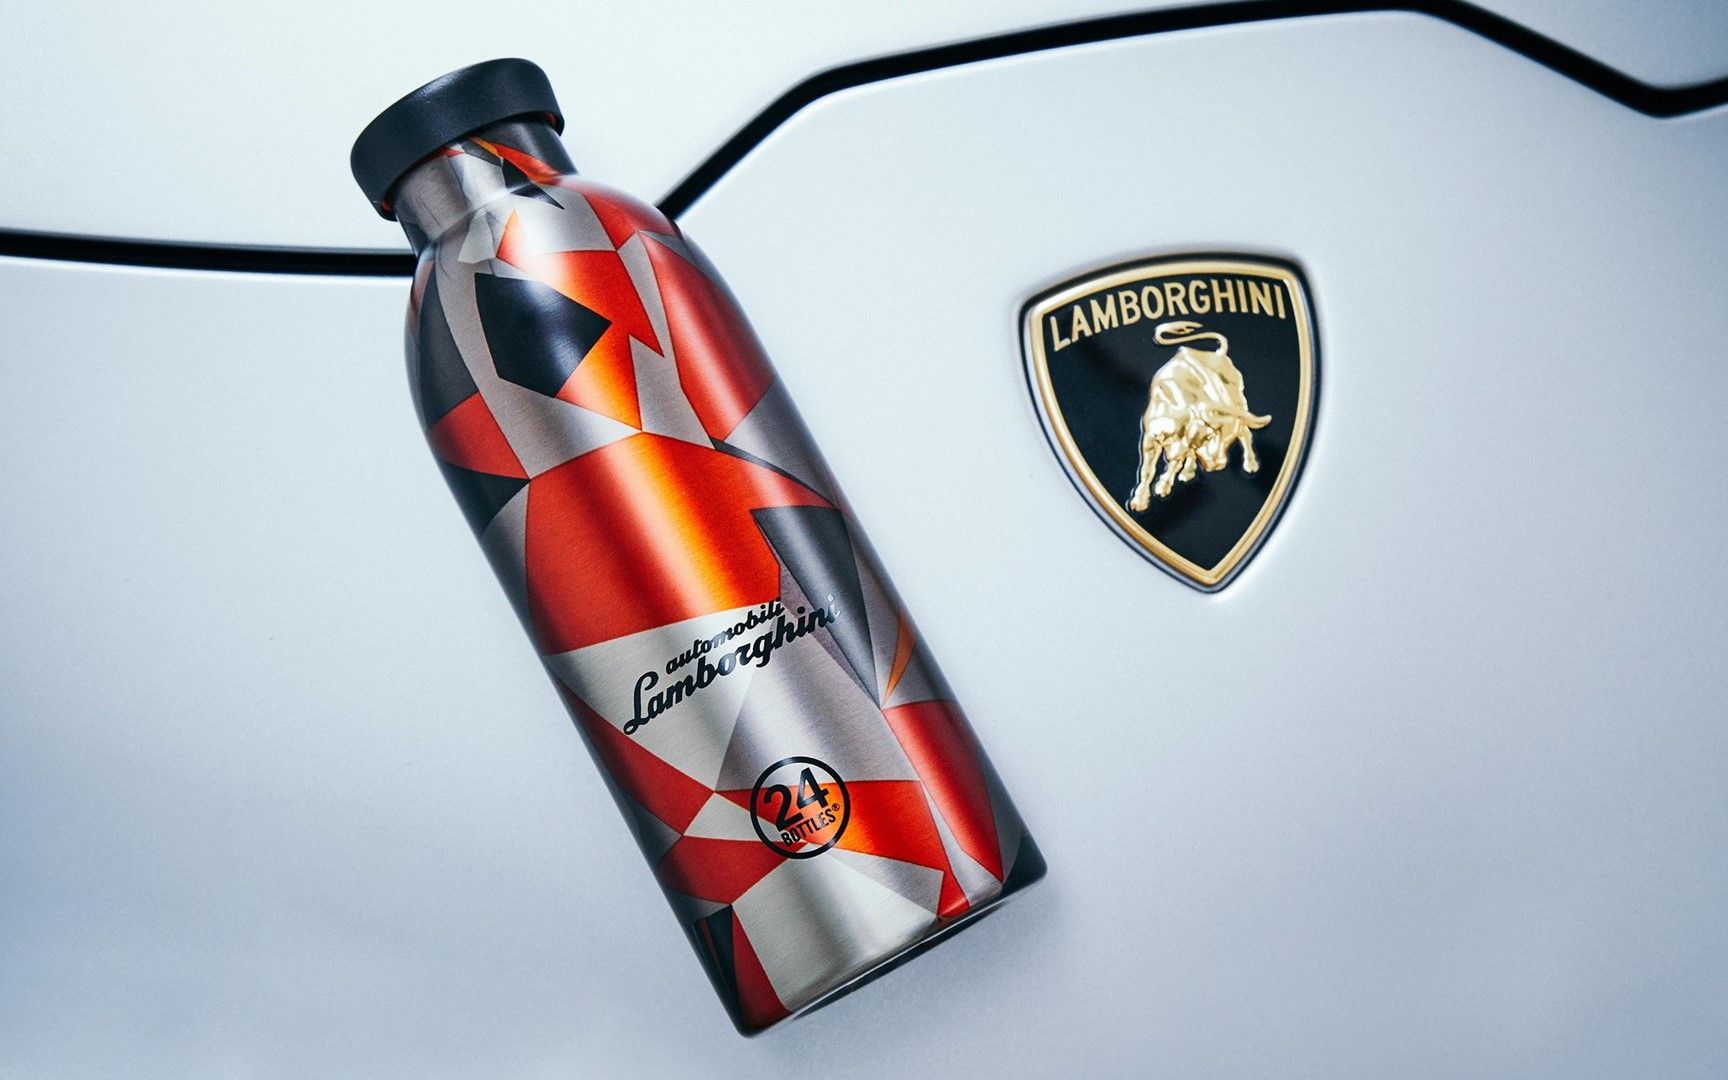 The new Special Edition Climate Bottle by 24Bottles x Lamborghini Inspired by the camouflage pattern of the Lamborghini Aventador SVJ